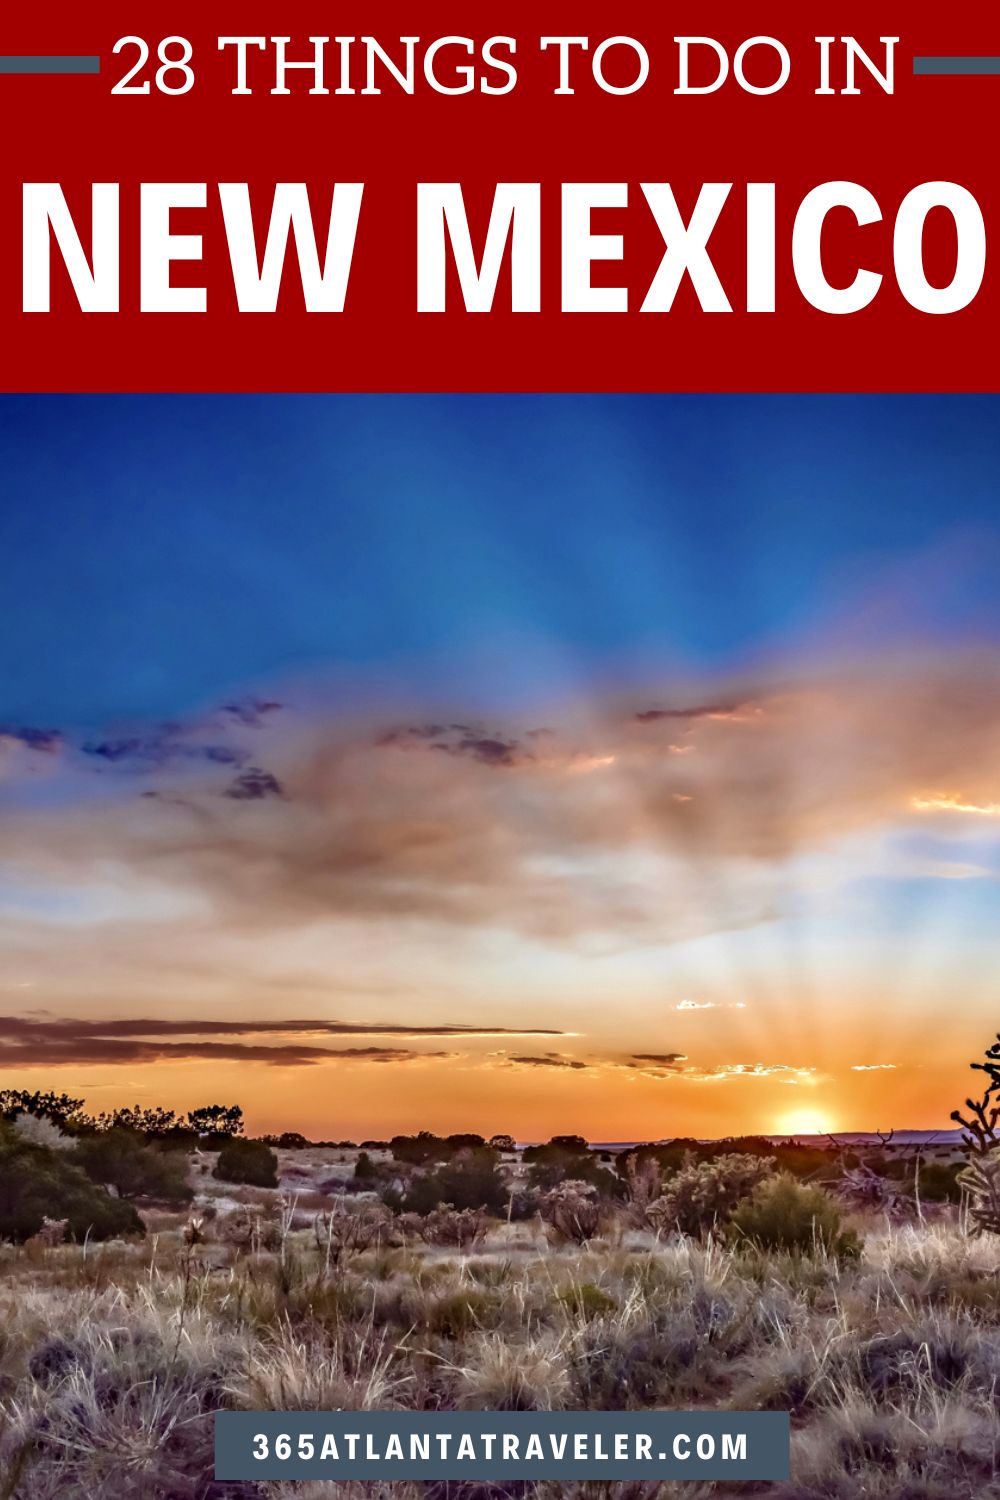 28 THINGS TO DO IN NEW MEXICO EVERYONE WILL LOVE